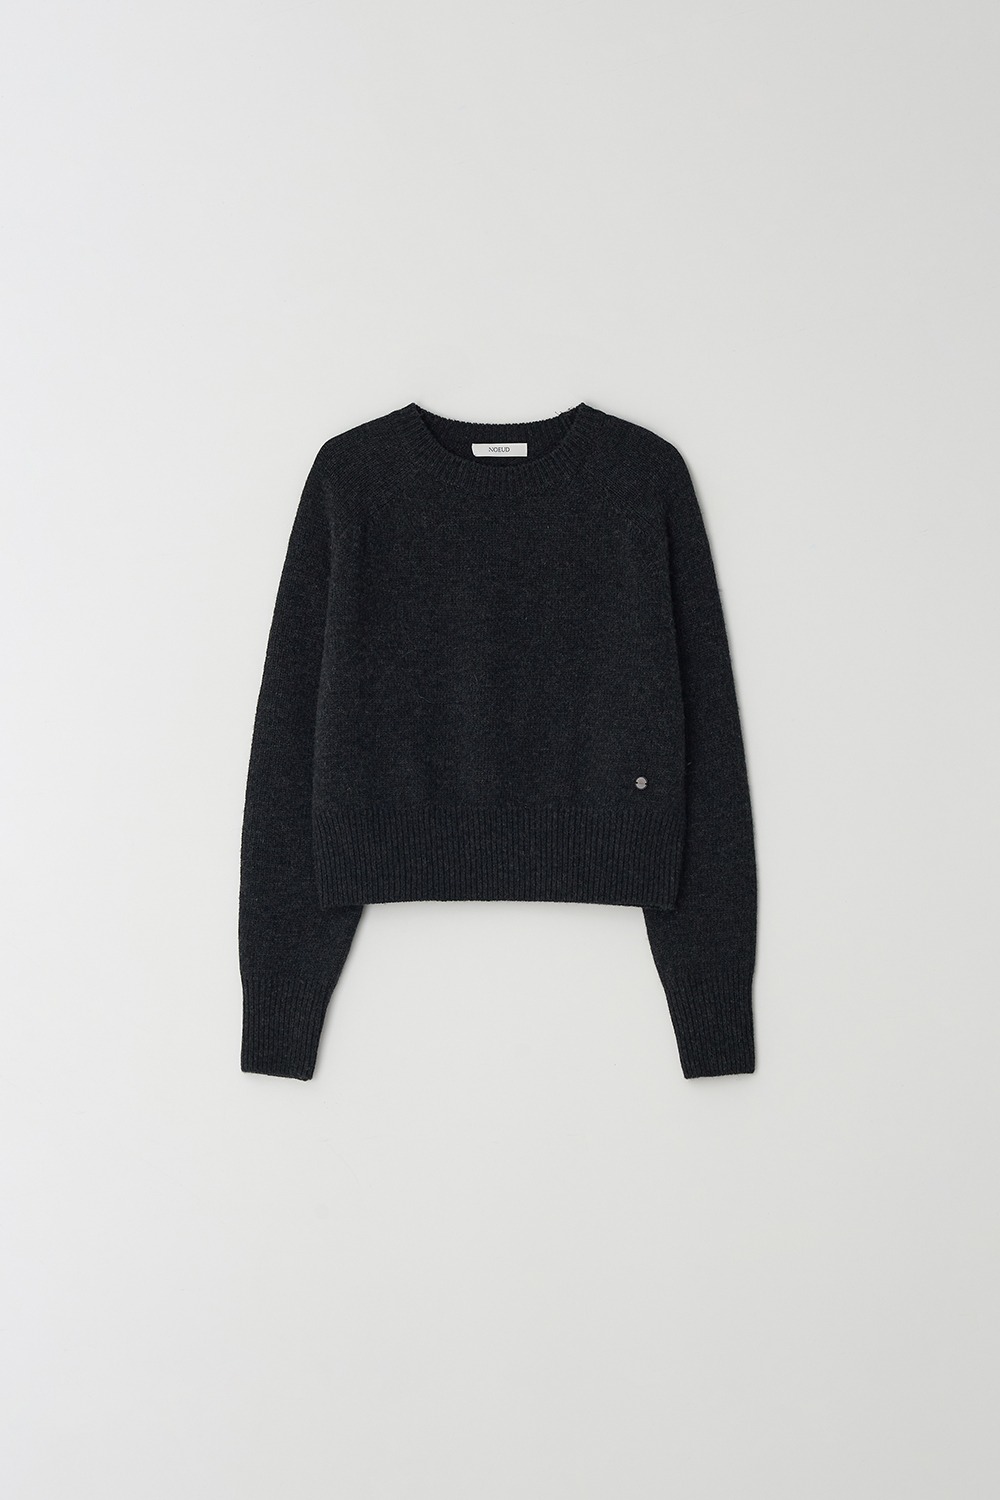 Lambs wool pullover (Charcoal)